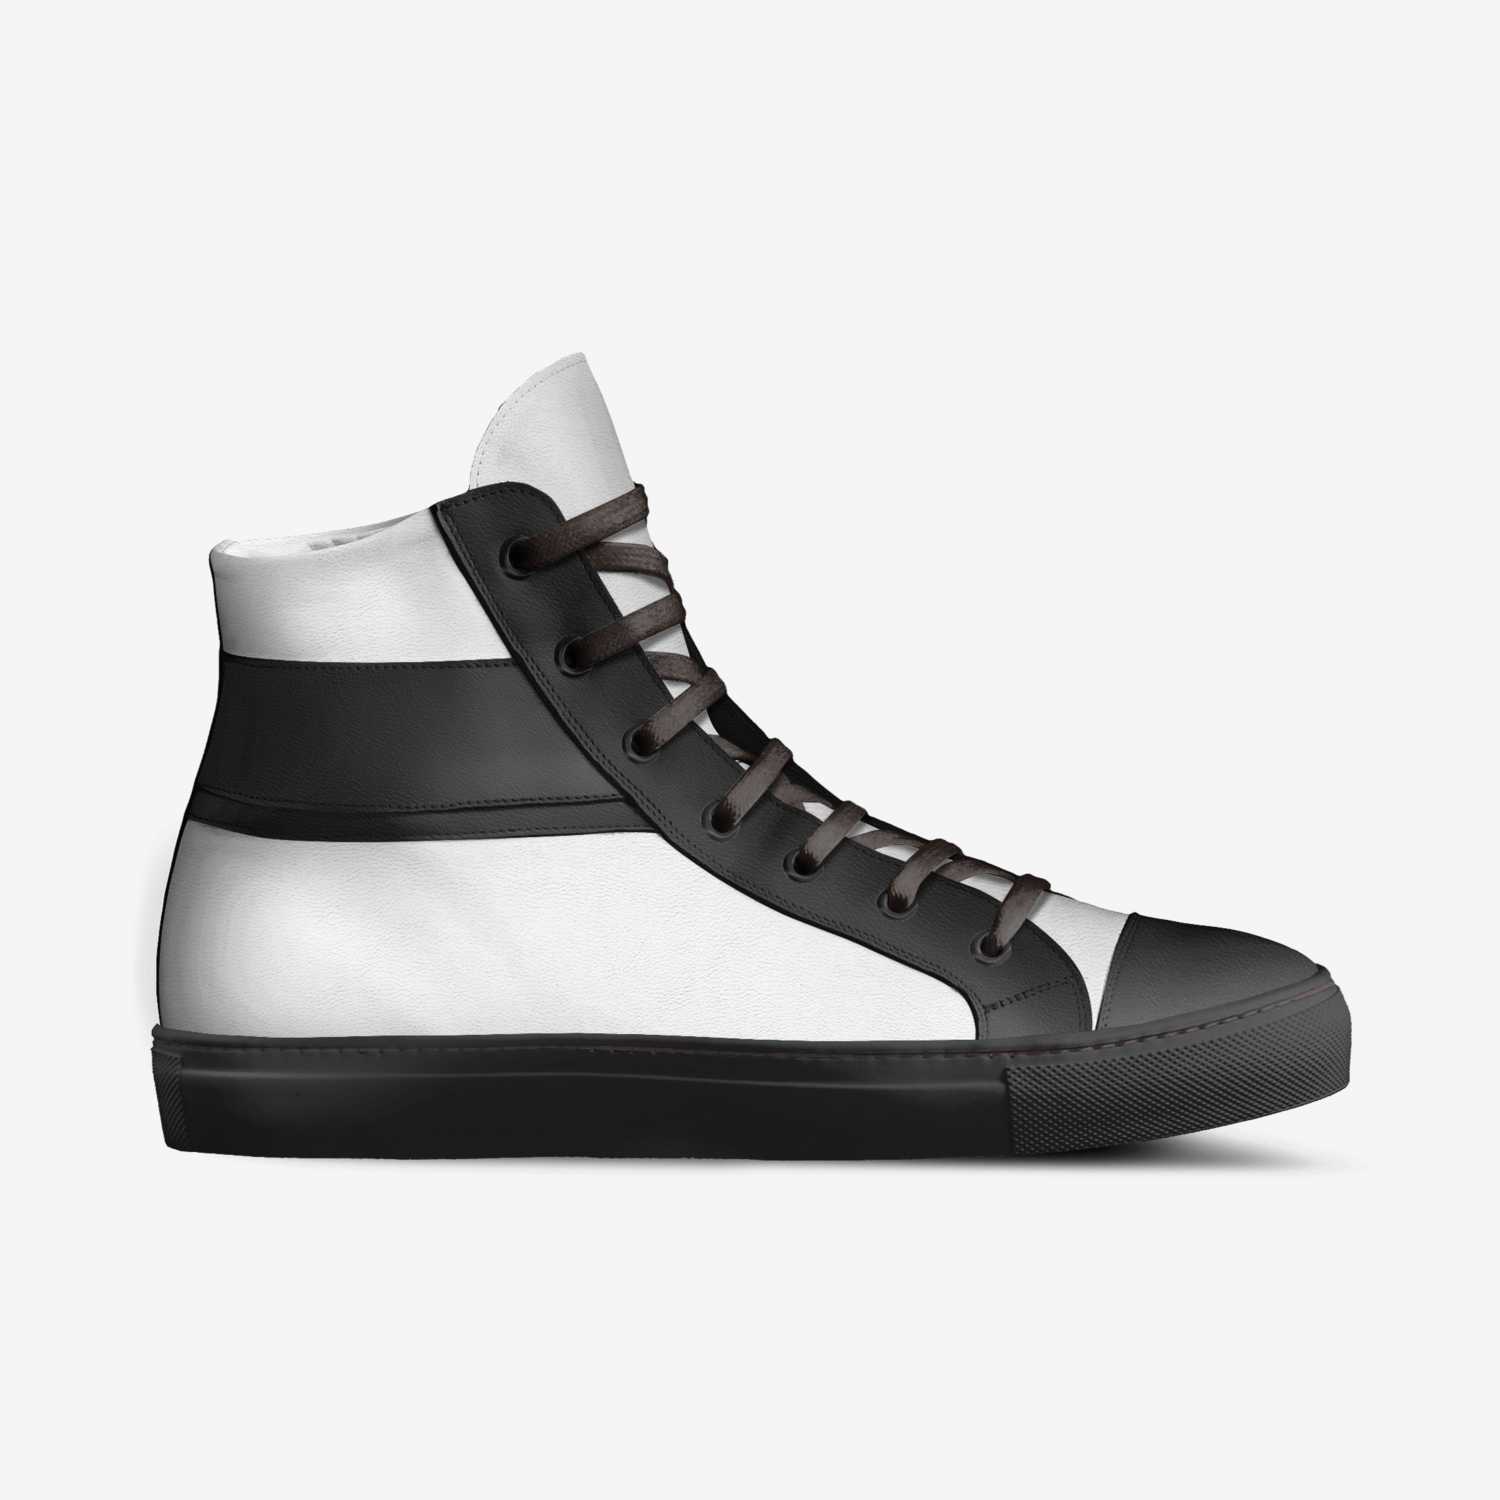 Pro lc custom made in Italy shoes by Laurent Chevallier | Side view